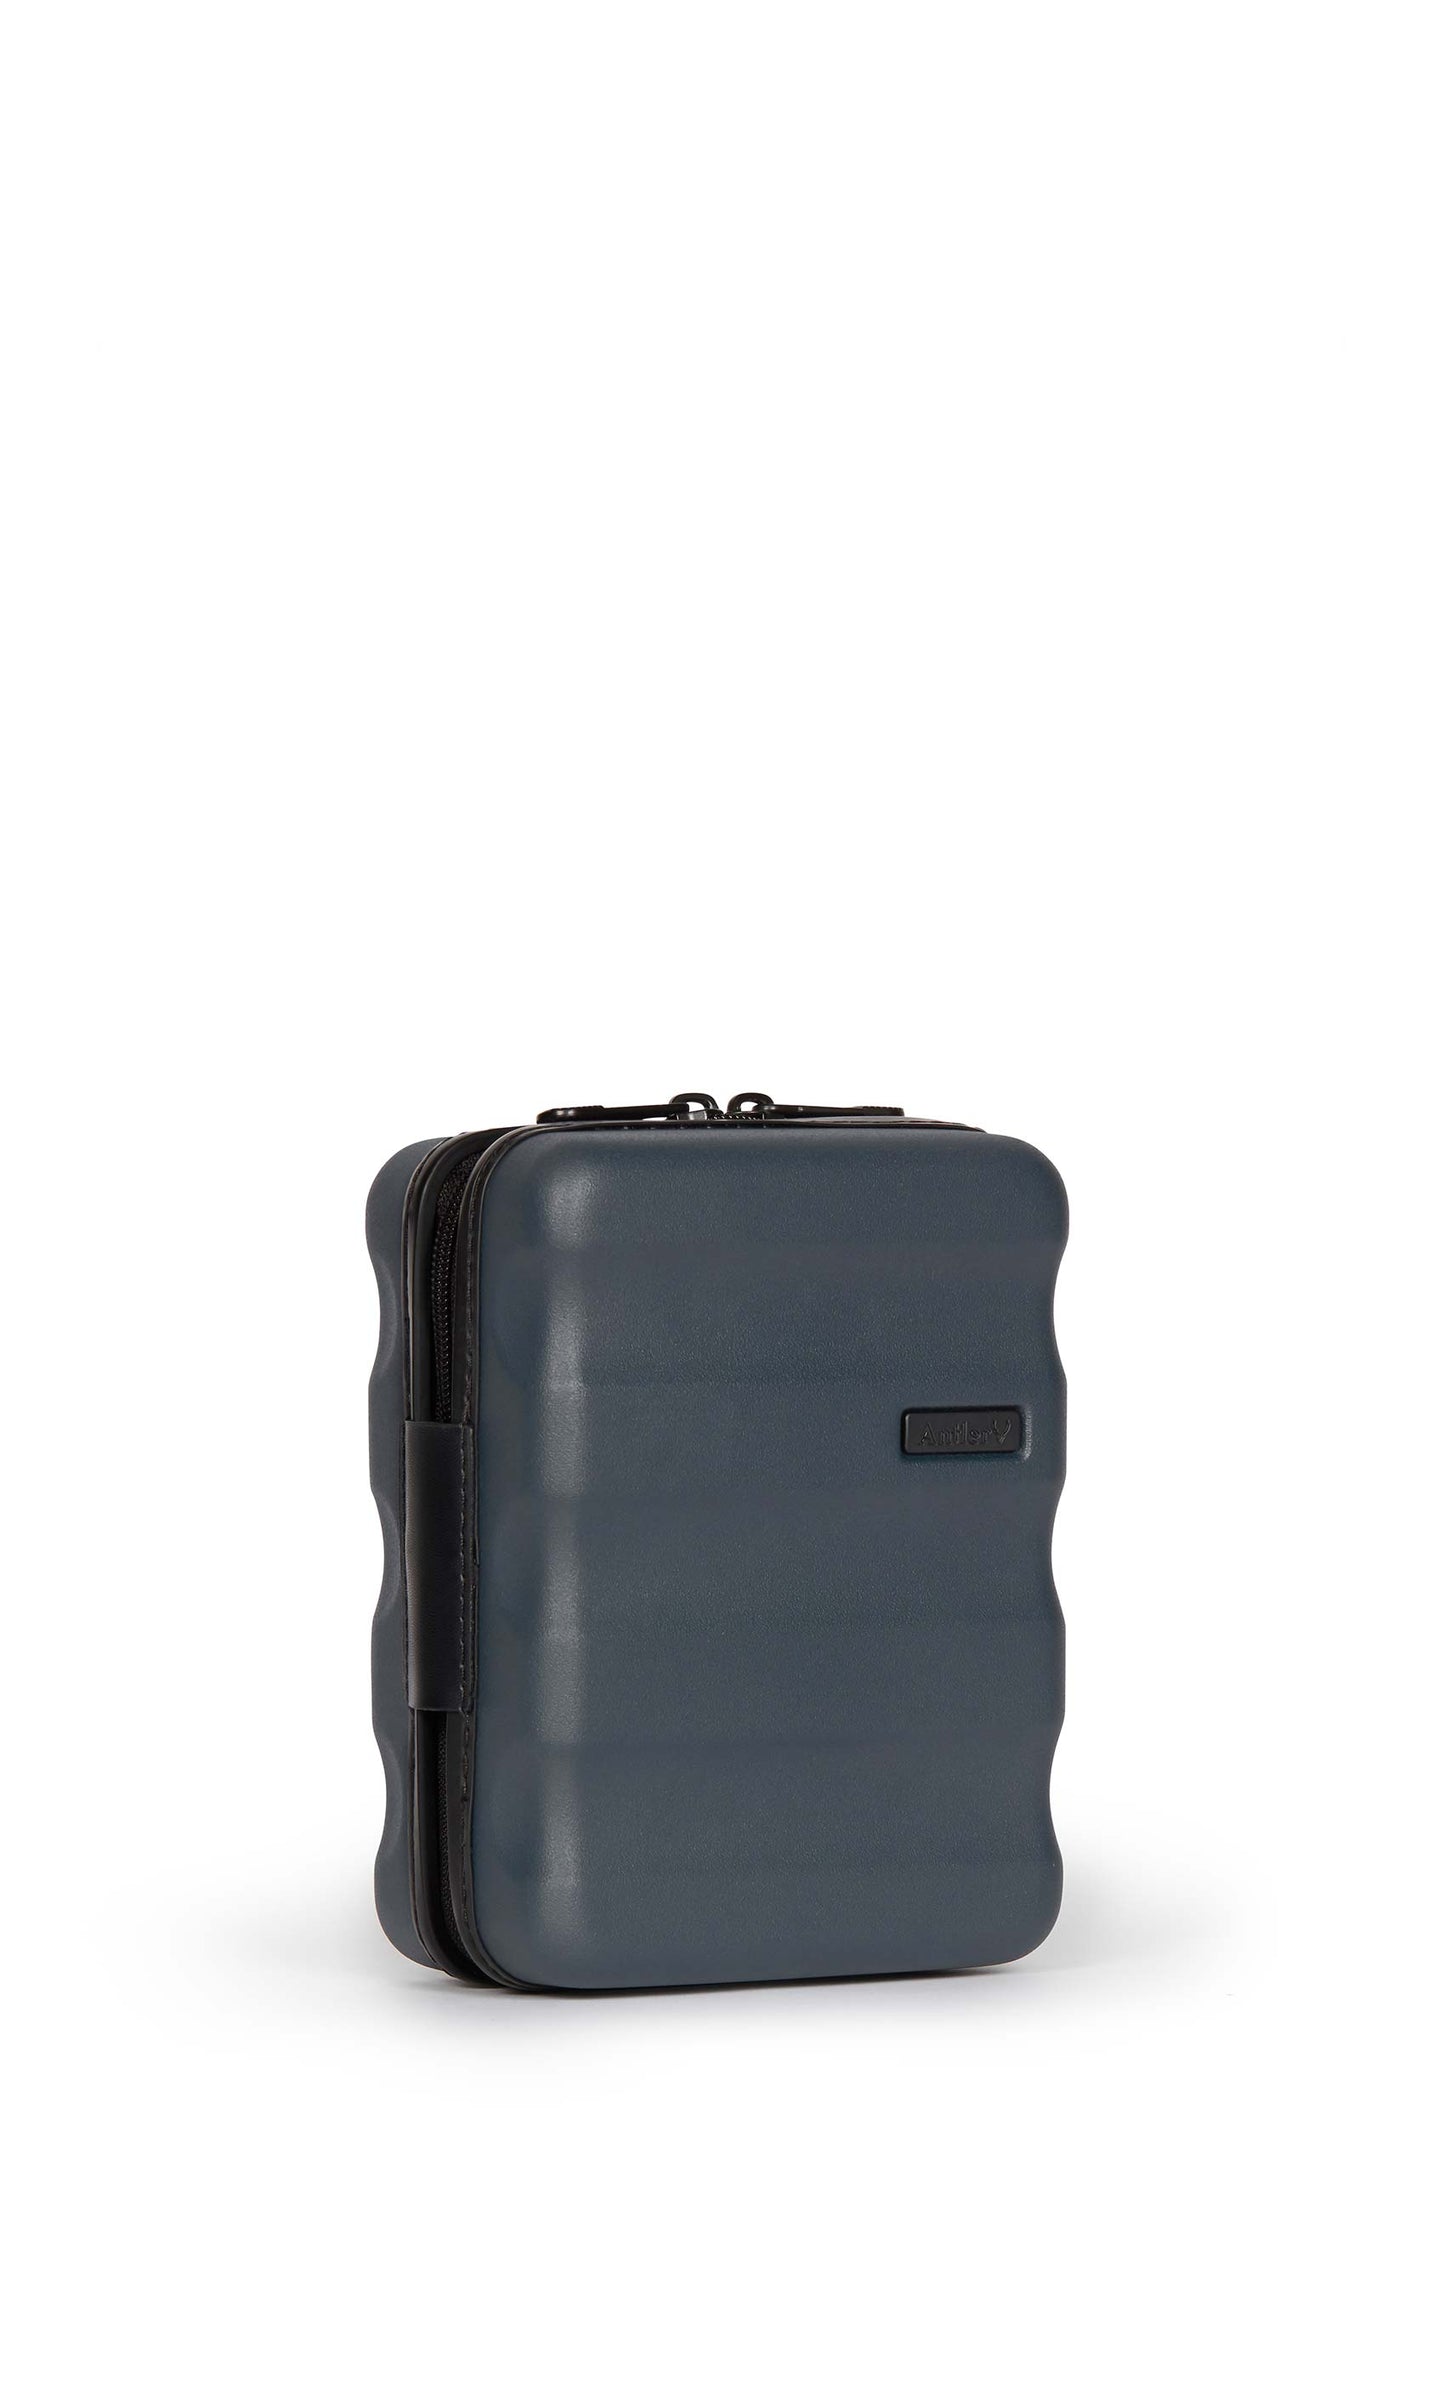 Antler Luggage -  Clifton mini in navy - Hard Suitcases Clifton Mini Case Navy | Travel Gifts & Accessories | Antler EU